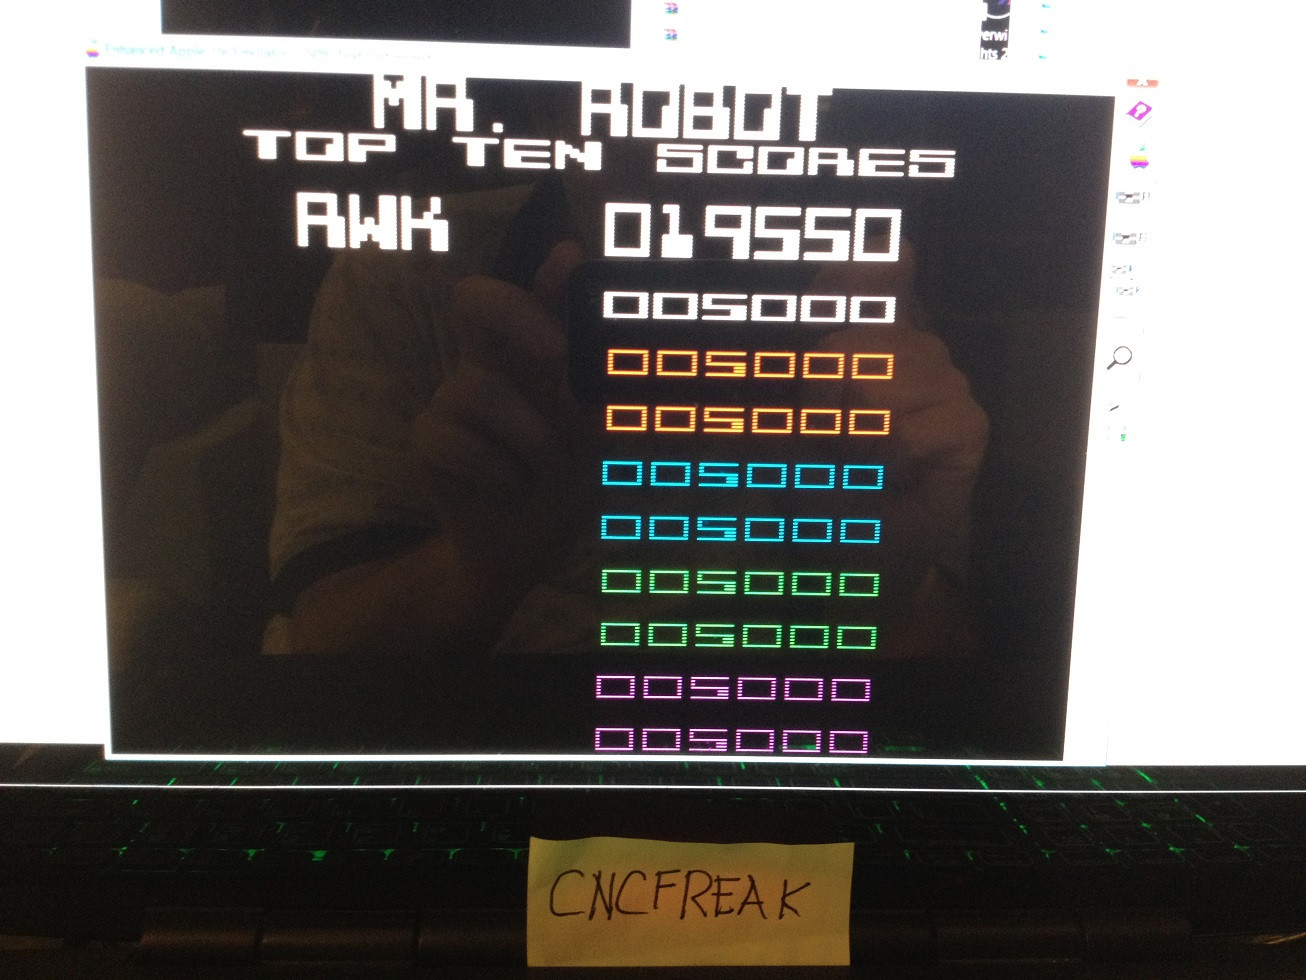 cncfreak: Mr. Robot and His Robot Factory (Apple II Emulated) 19,550 points on 2013-10-16 23:04:32